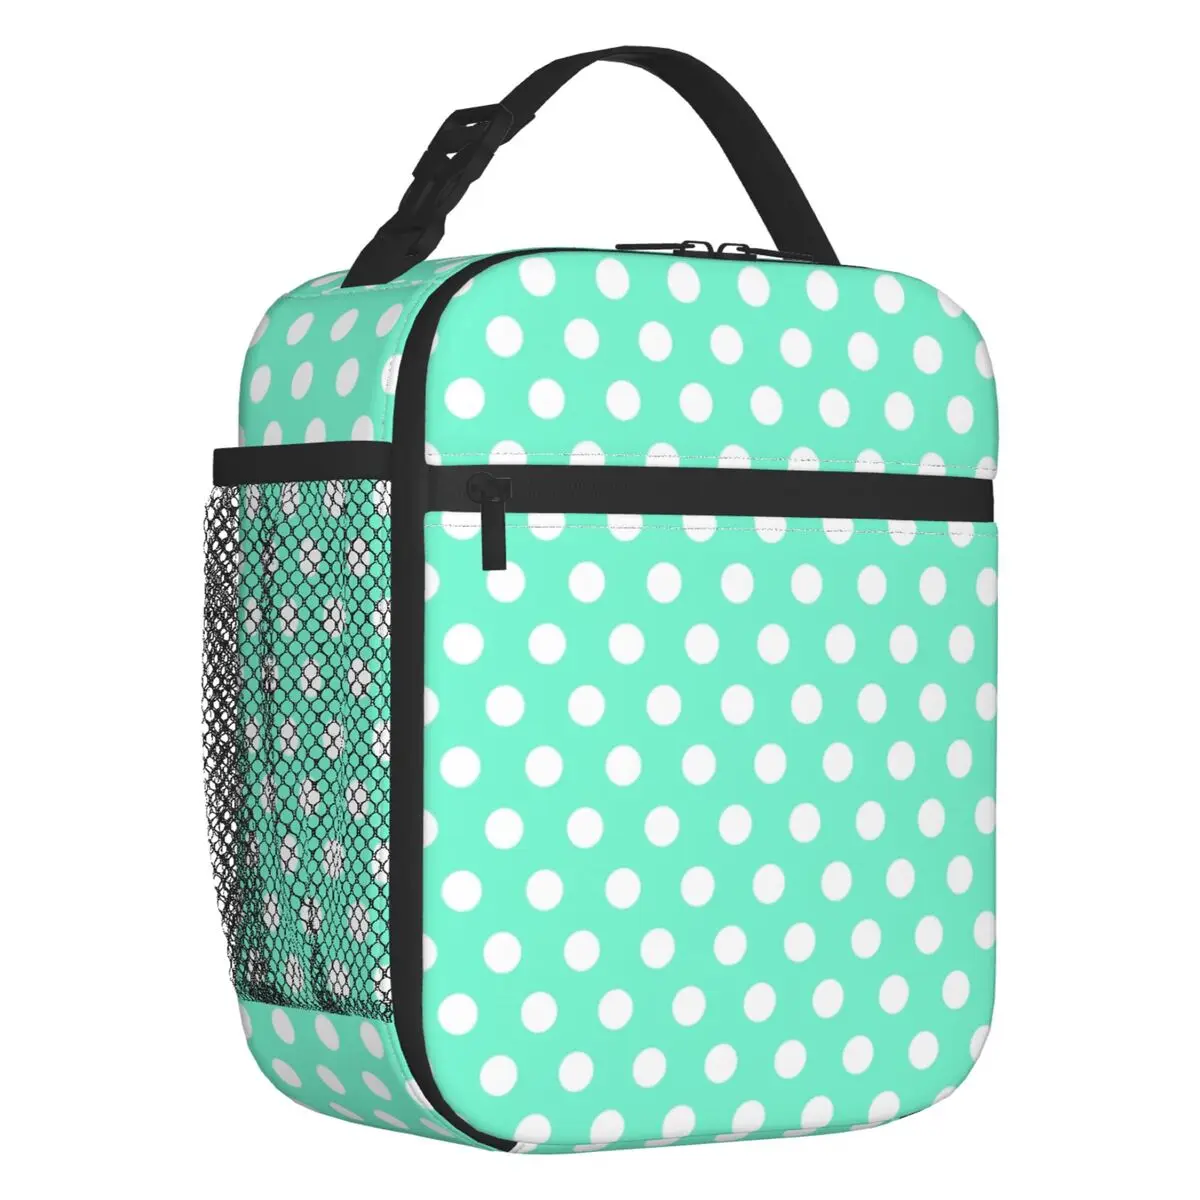 

White Polka Dots On Mint Portable Lunch Box for Women Leakproof Thermal Cooler Food Insulated Lunch Bag Kids School Children